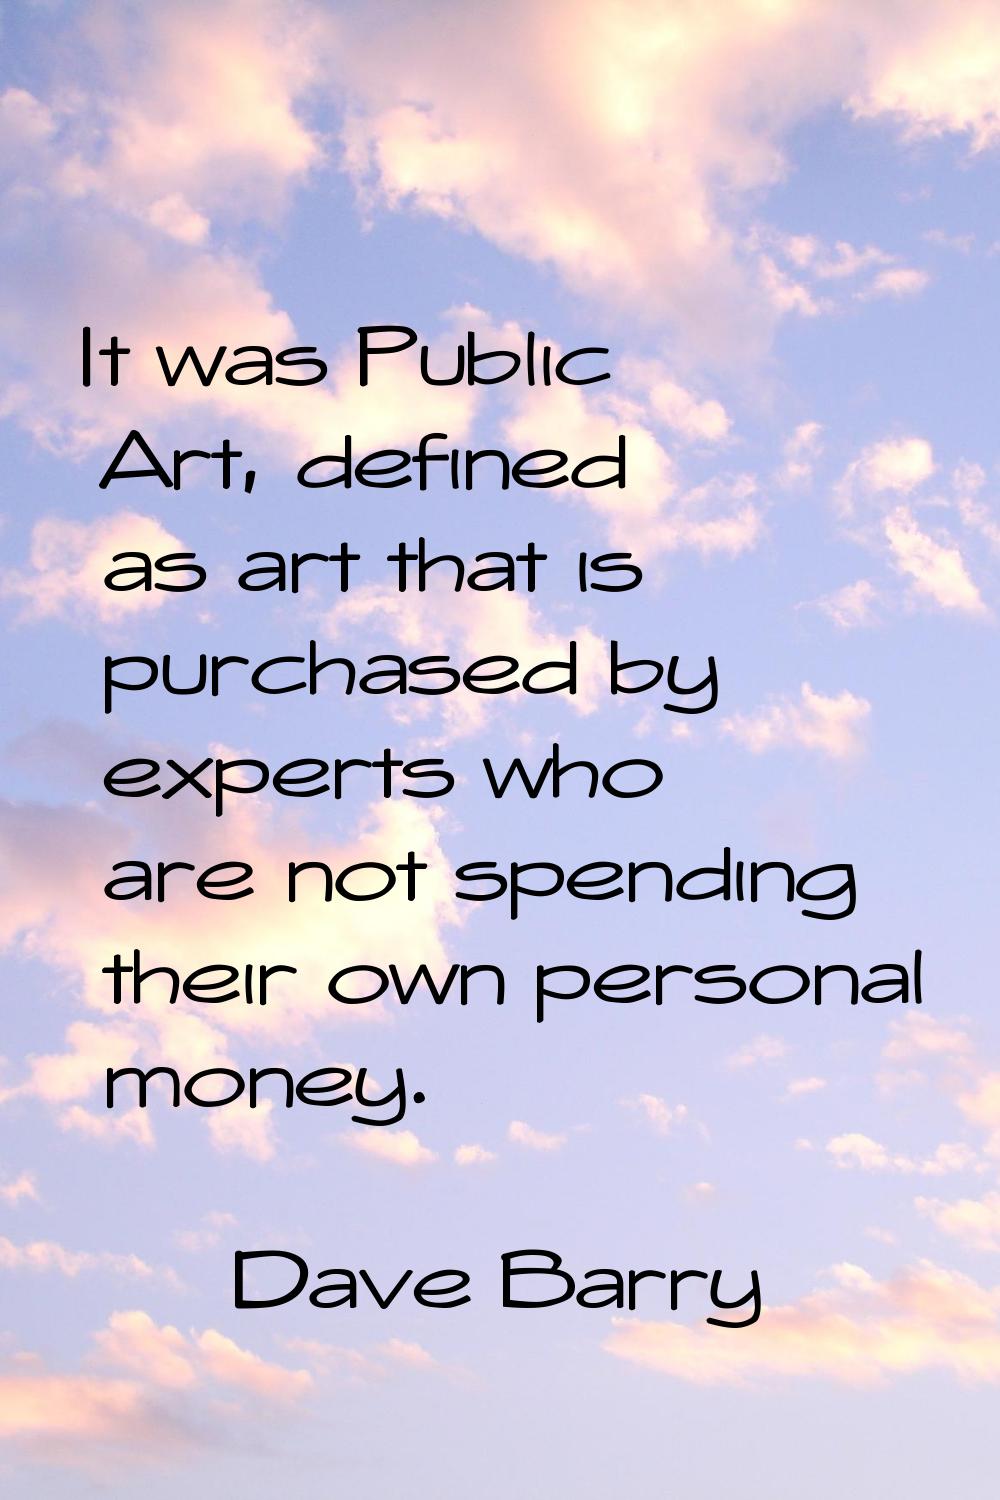 It was Public Art, defined as art that is purchased by experts who are not spending their own perso